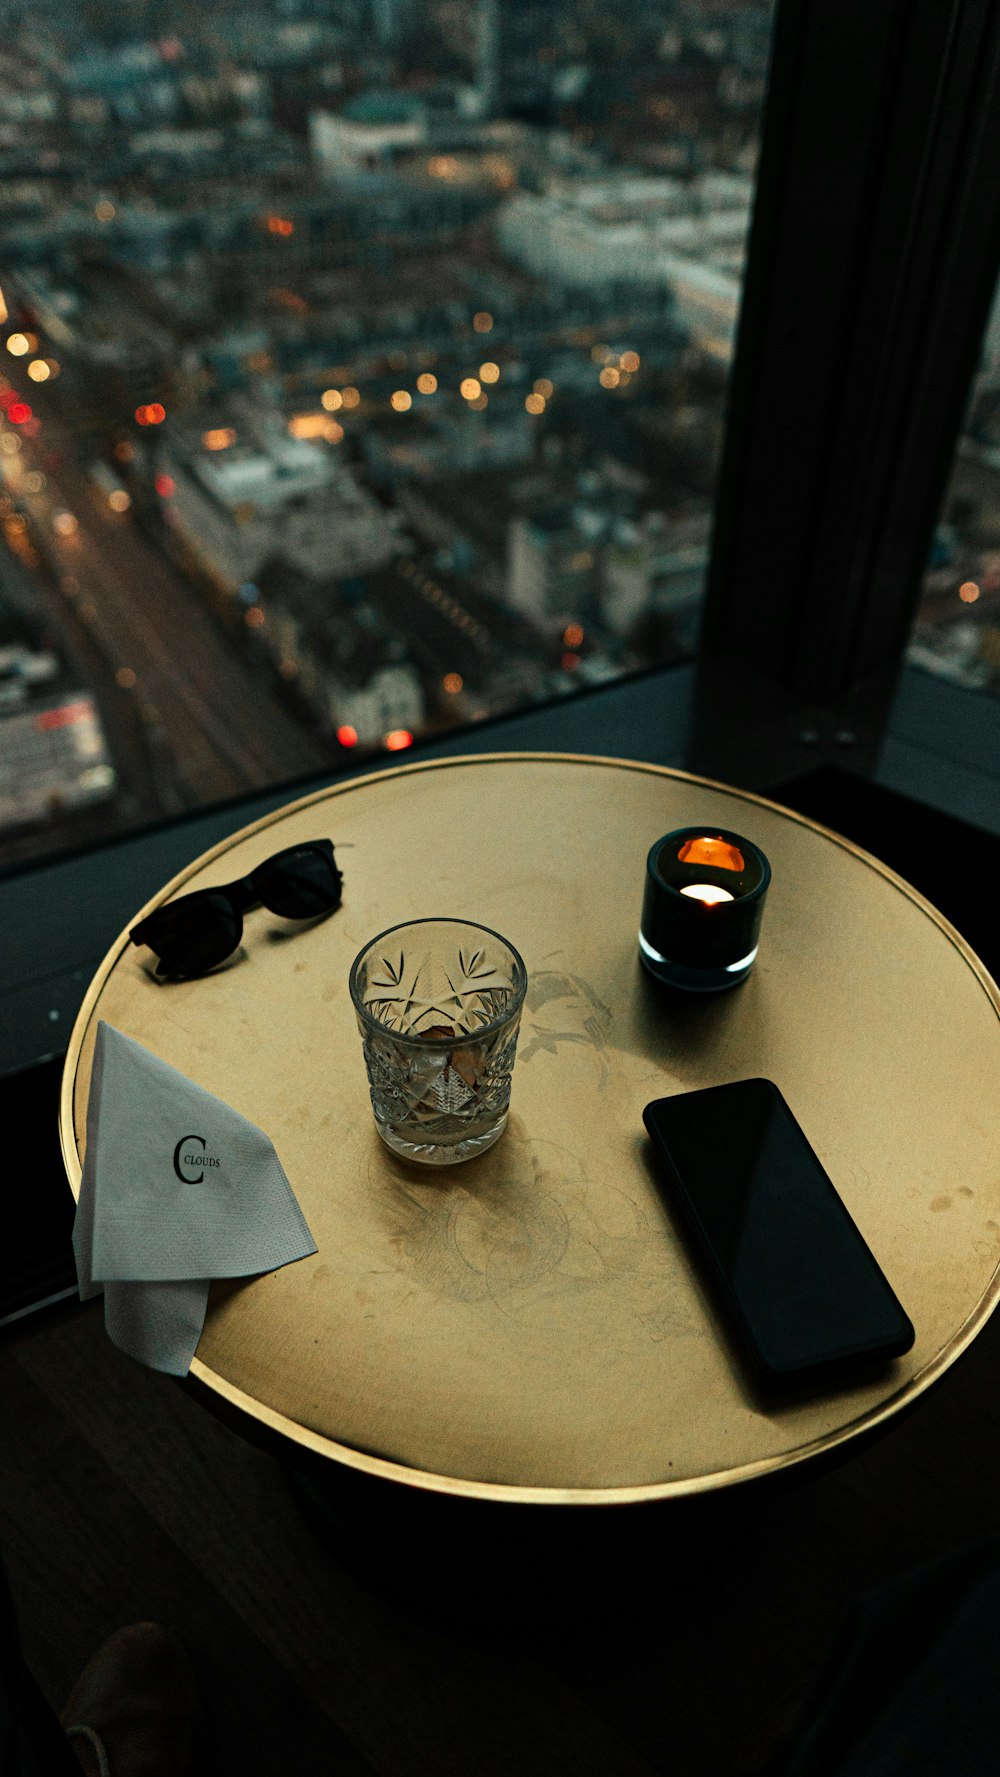 a table with a cell phone and a glass on it